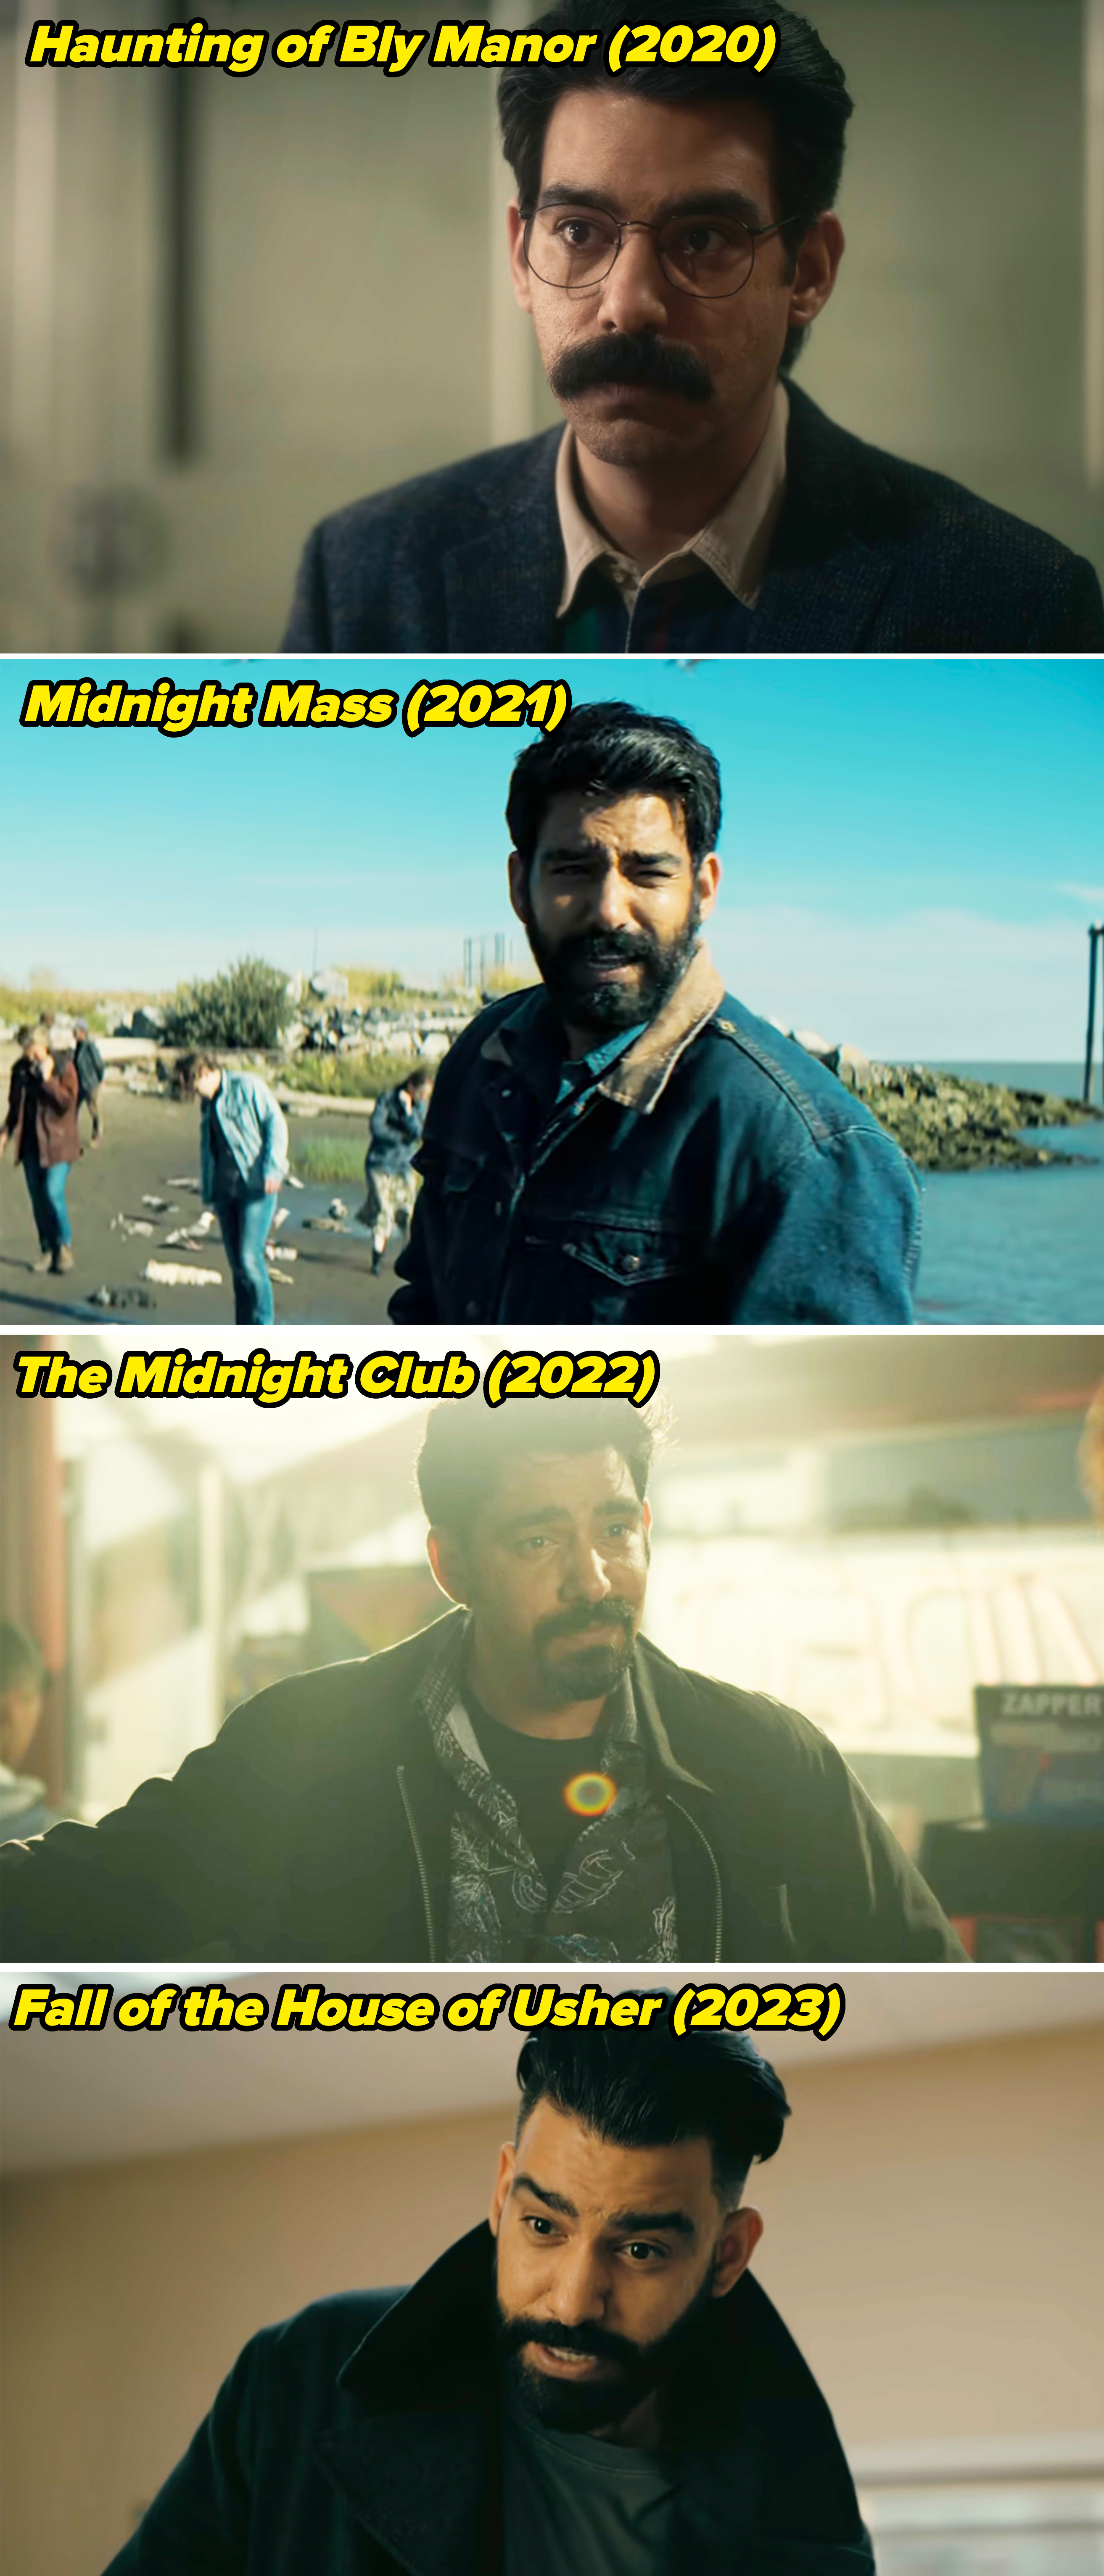 Rahul Kohli in various projects